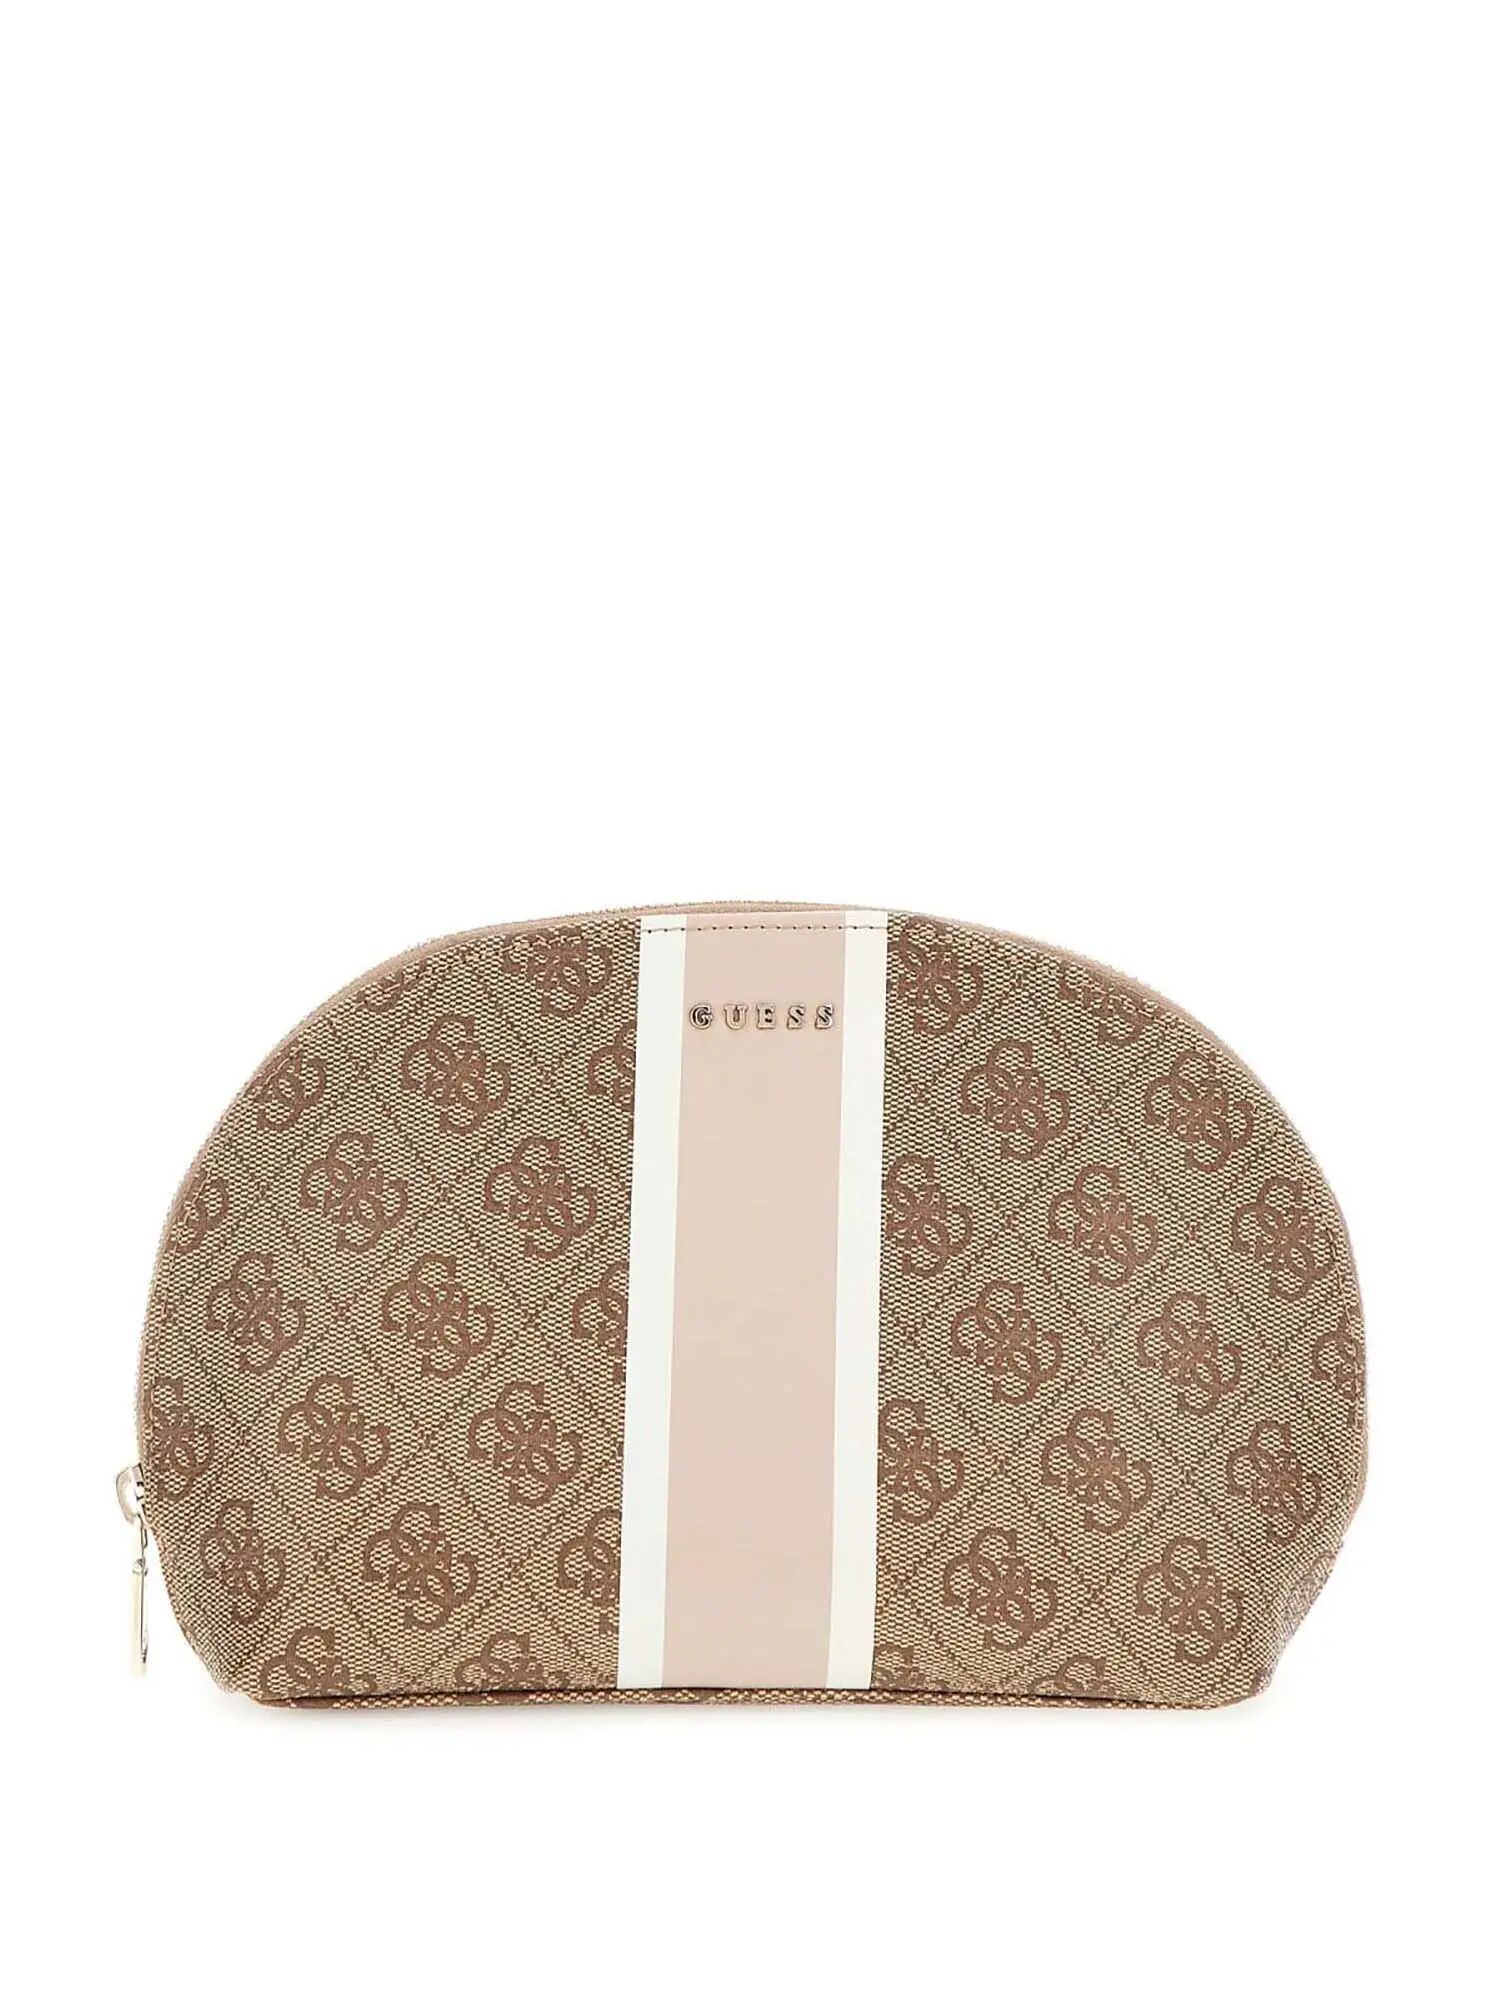 Guess Beauty Donna Colore Beige BEIGE 1